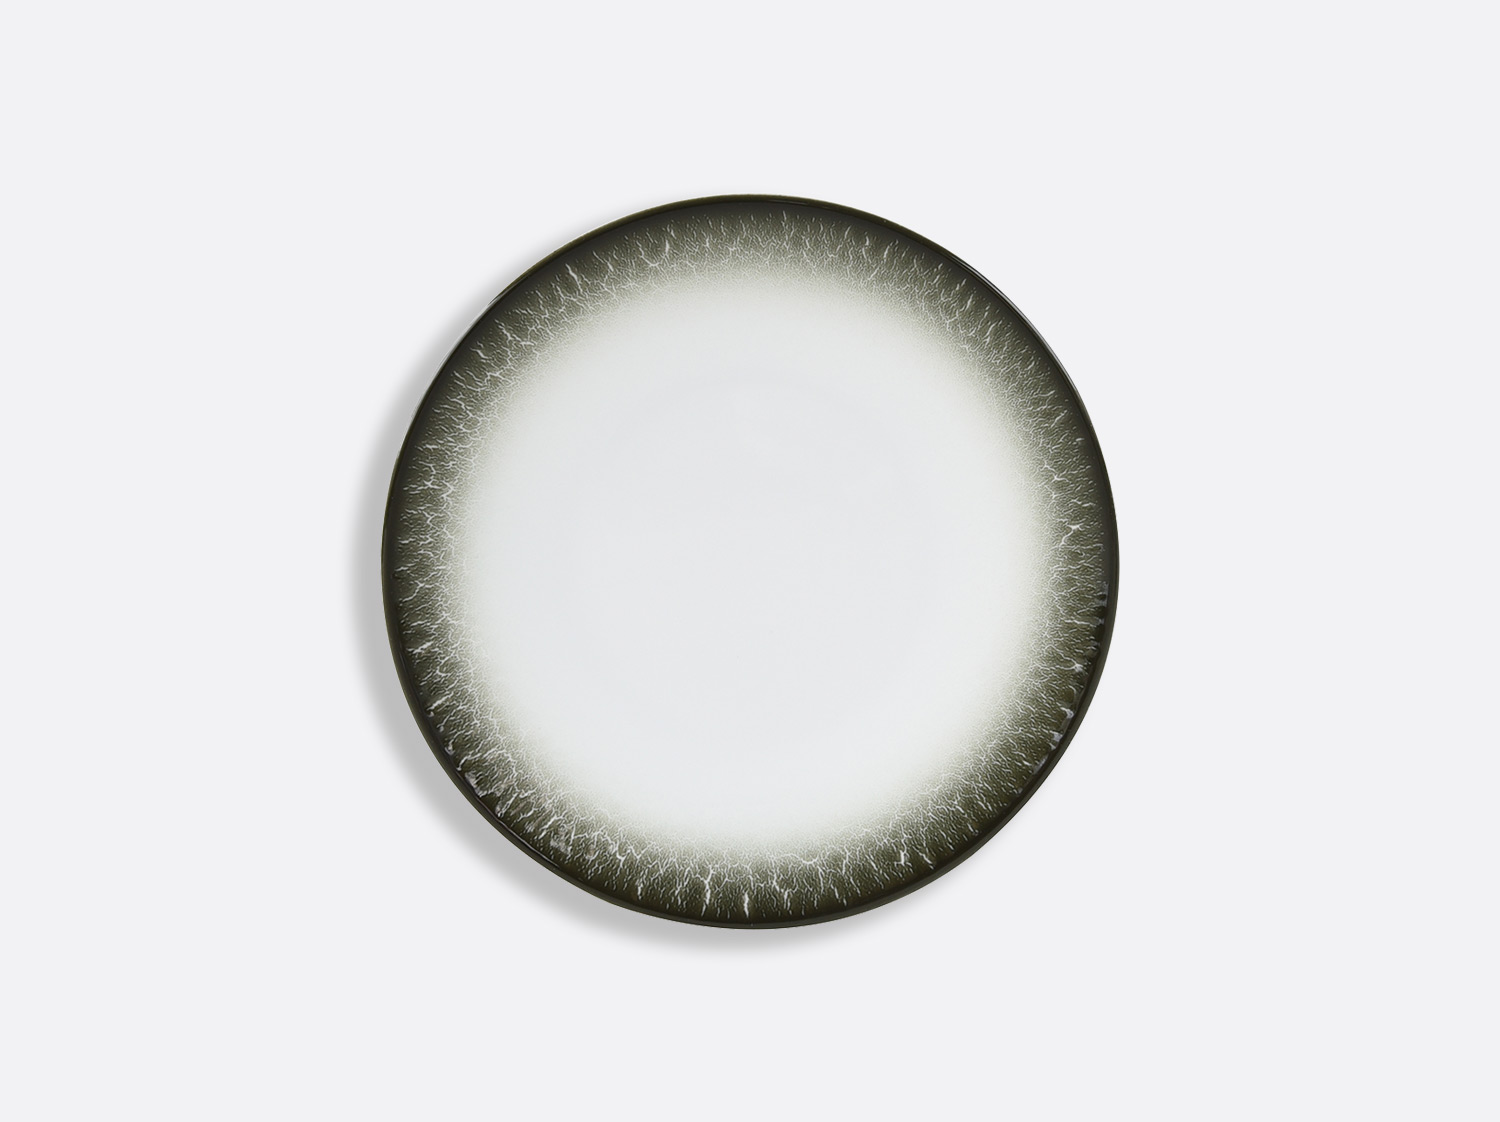 China Coupe plate 16.5 cm of the collection TERRA LICHEN | Bernardaud